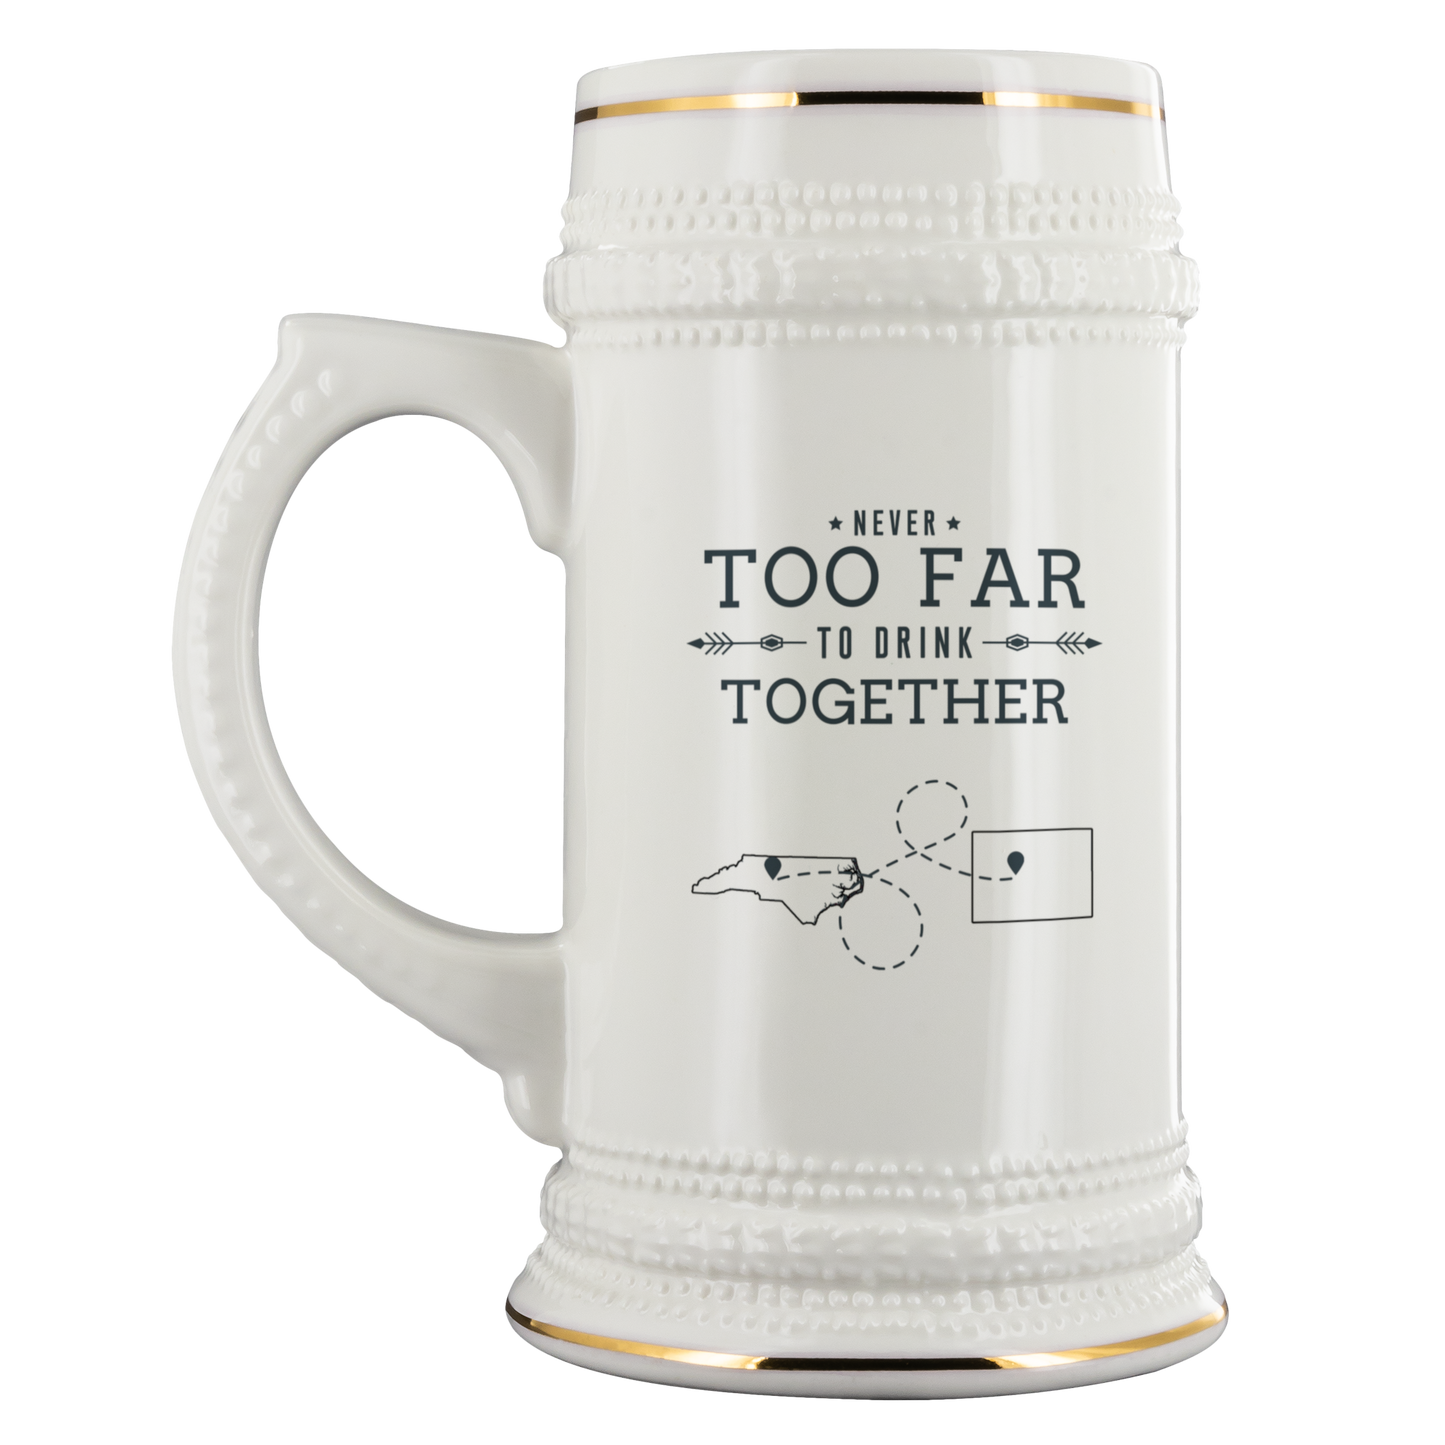 M-20402993-sp-17761 - Fathers Day Gifts Mug For Dad - Never Too Far To Drink Wine